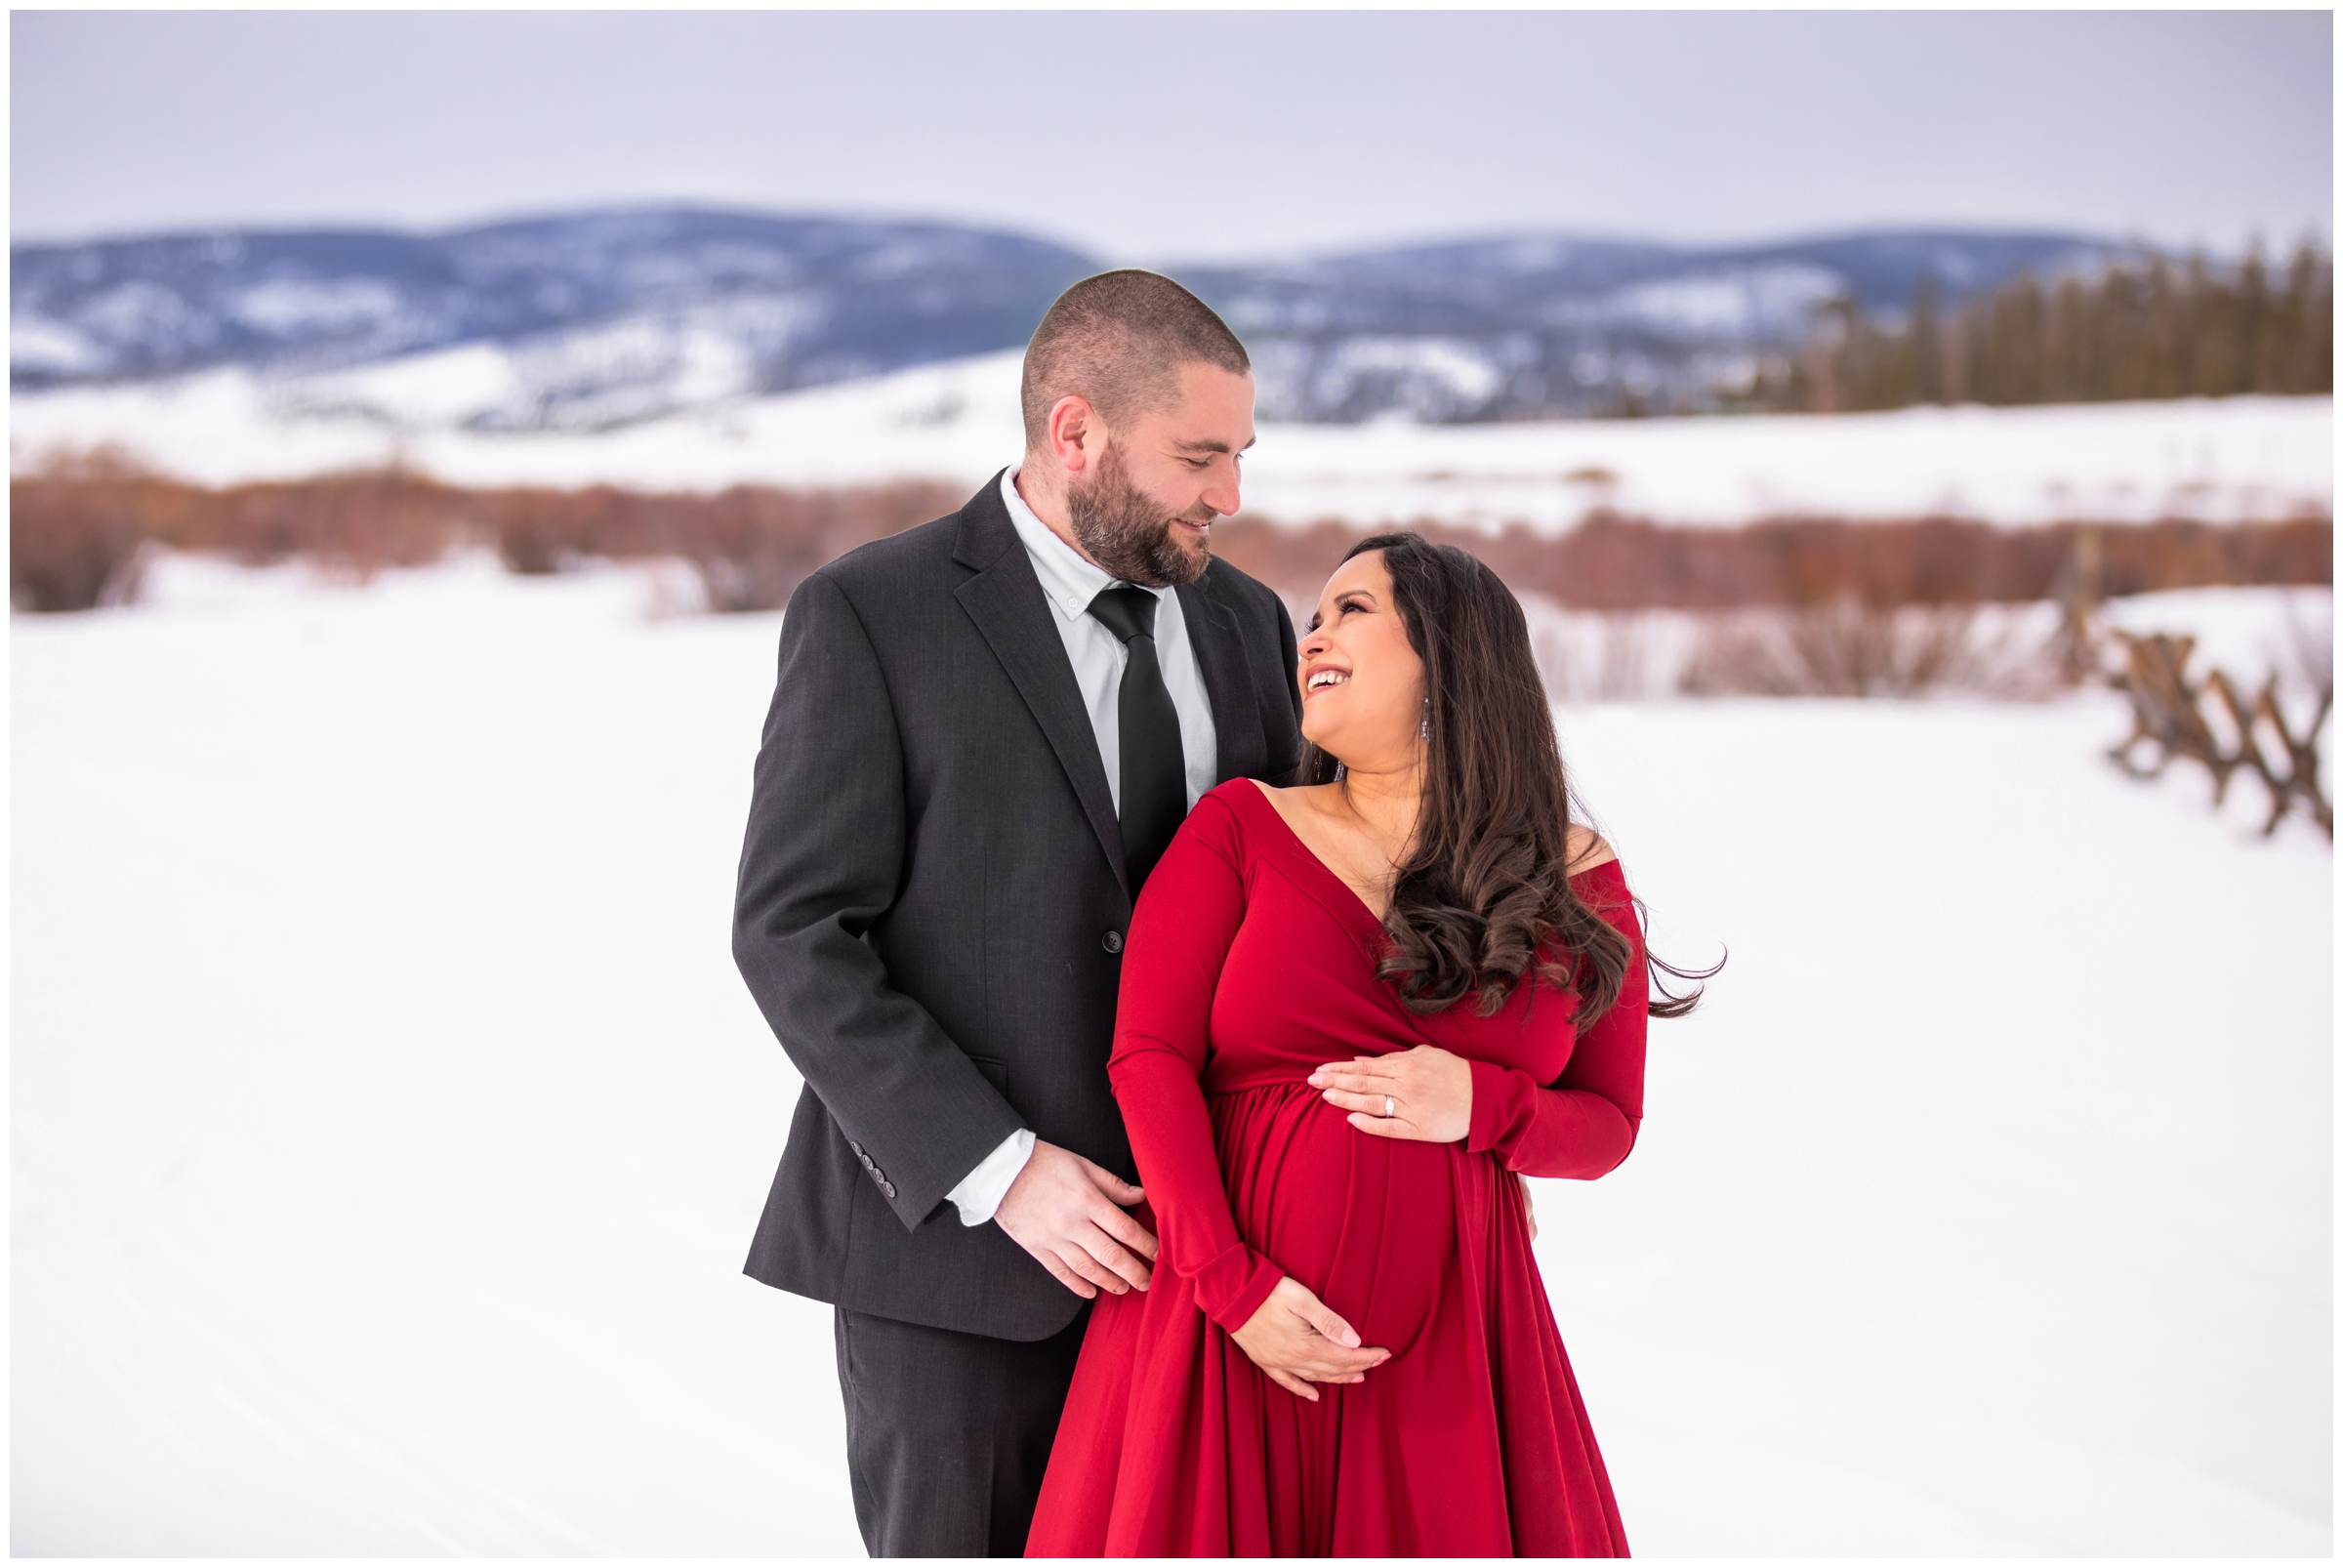 Colorado winter maternity portraits in the snow at Devil's Thumb Ranch by Winter Park photographer Plum Pretty Photography